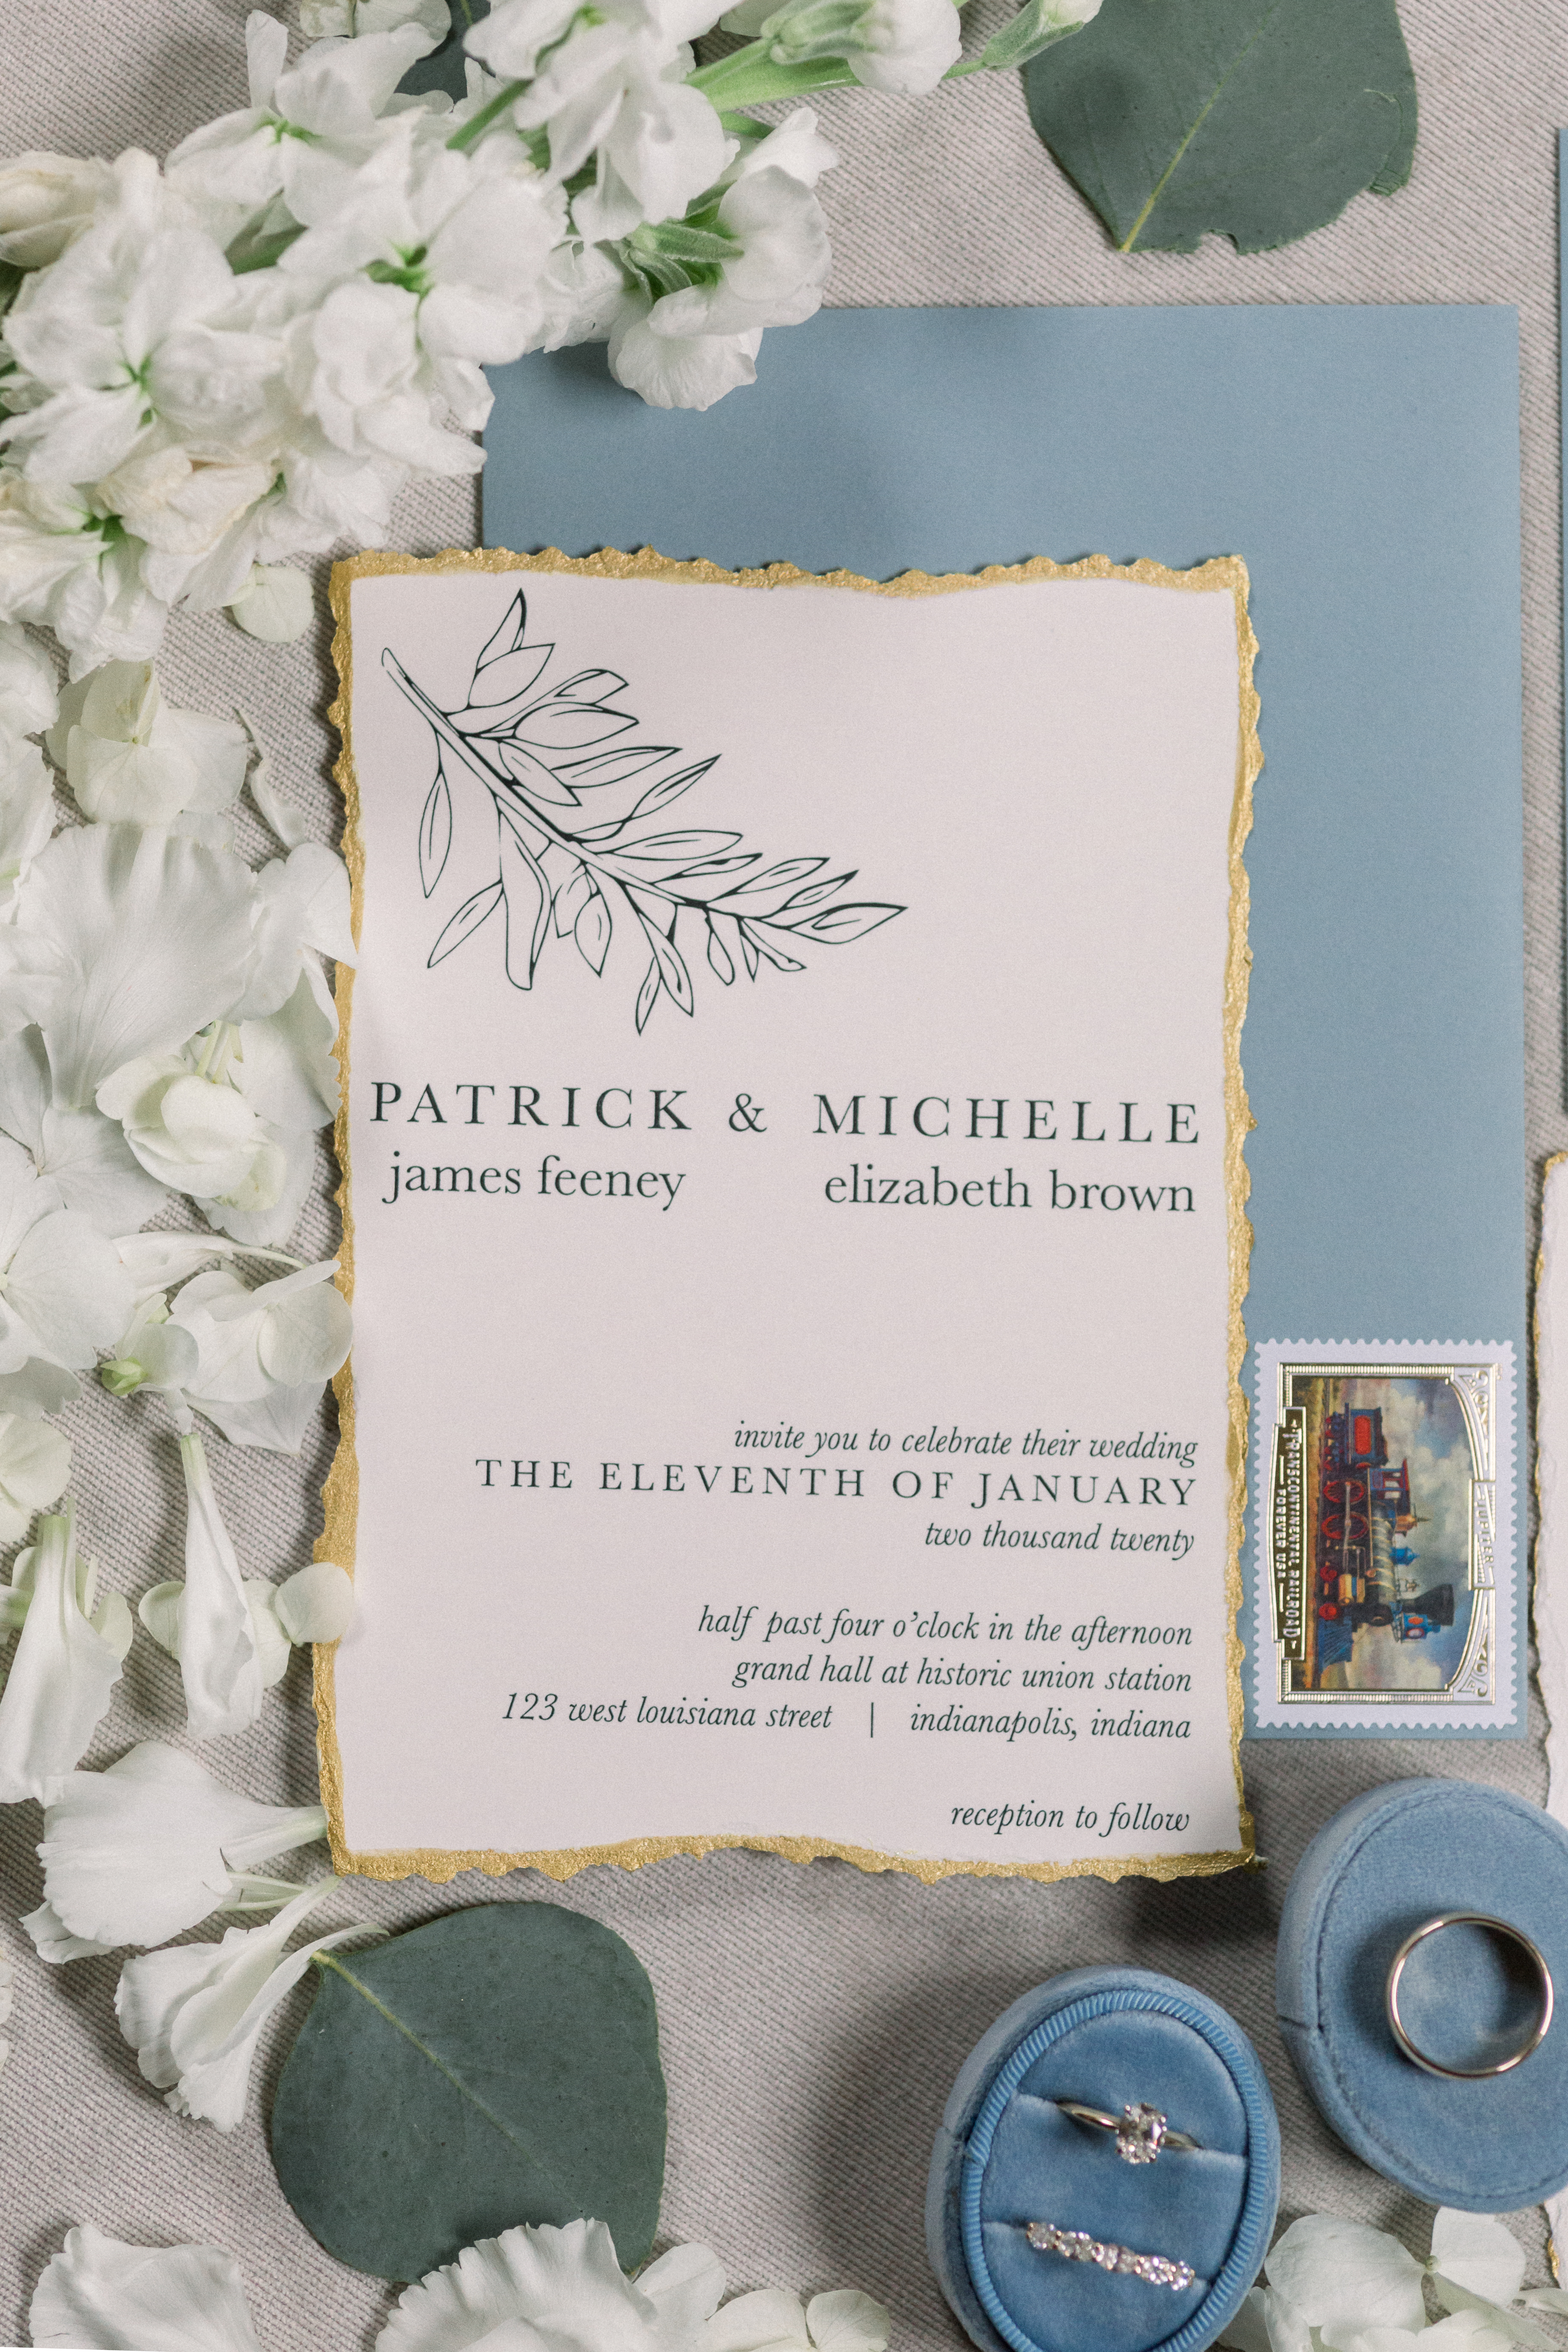 Wedding details including the invitations, rings and flowers